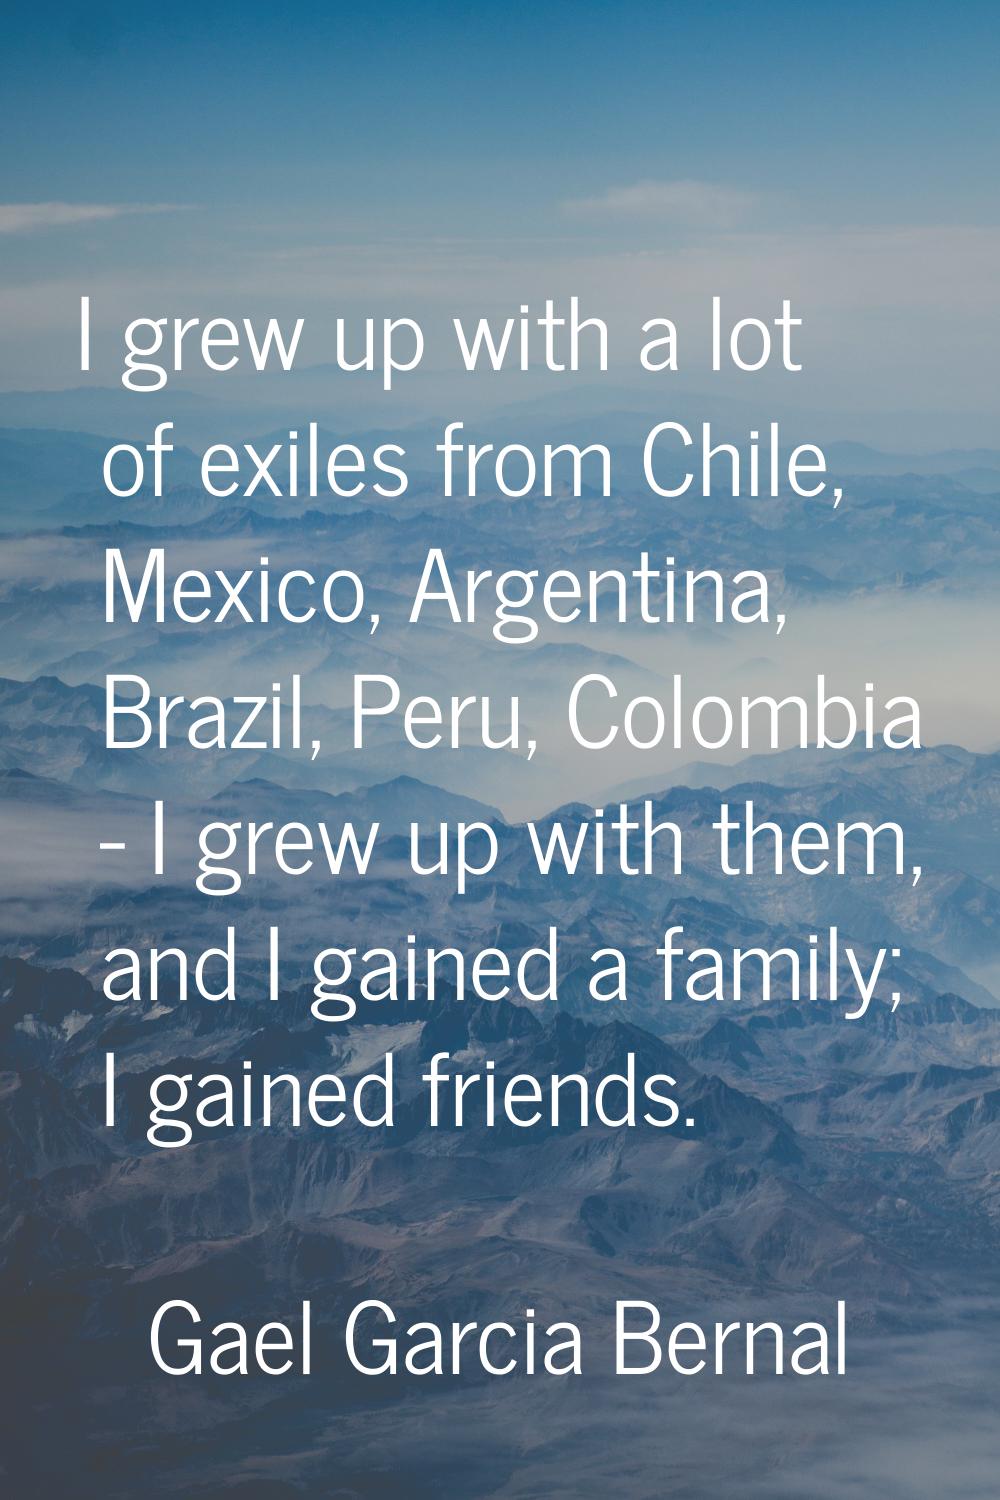 I grew up with a lot of exiles from Chile, Mexico, Argentina, Brazil, Peru, Colombia - I grew up wi